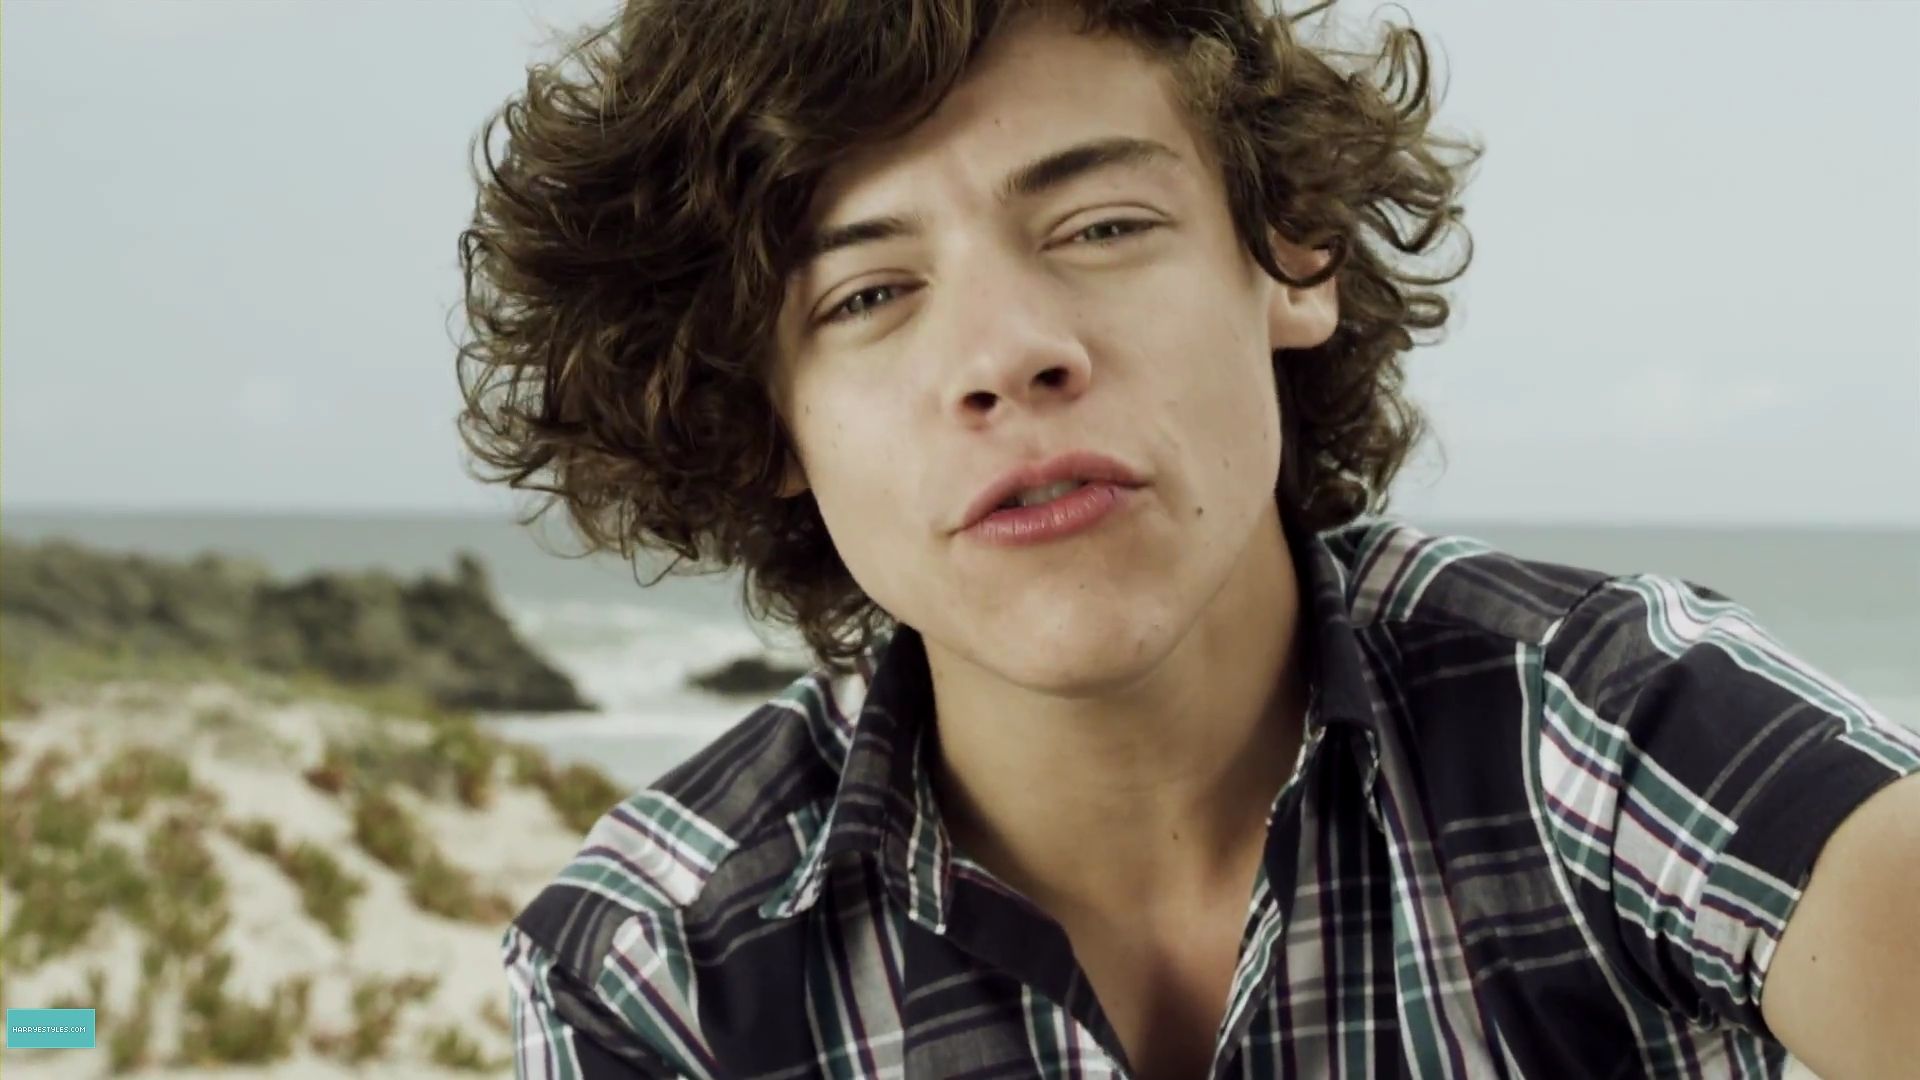 Music Video What makes you beautiful Direction Makes You Beautiful mp4 000029113 E Styles Gallery